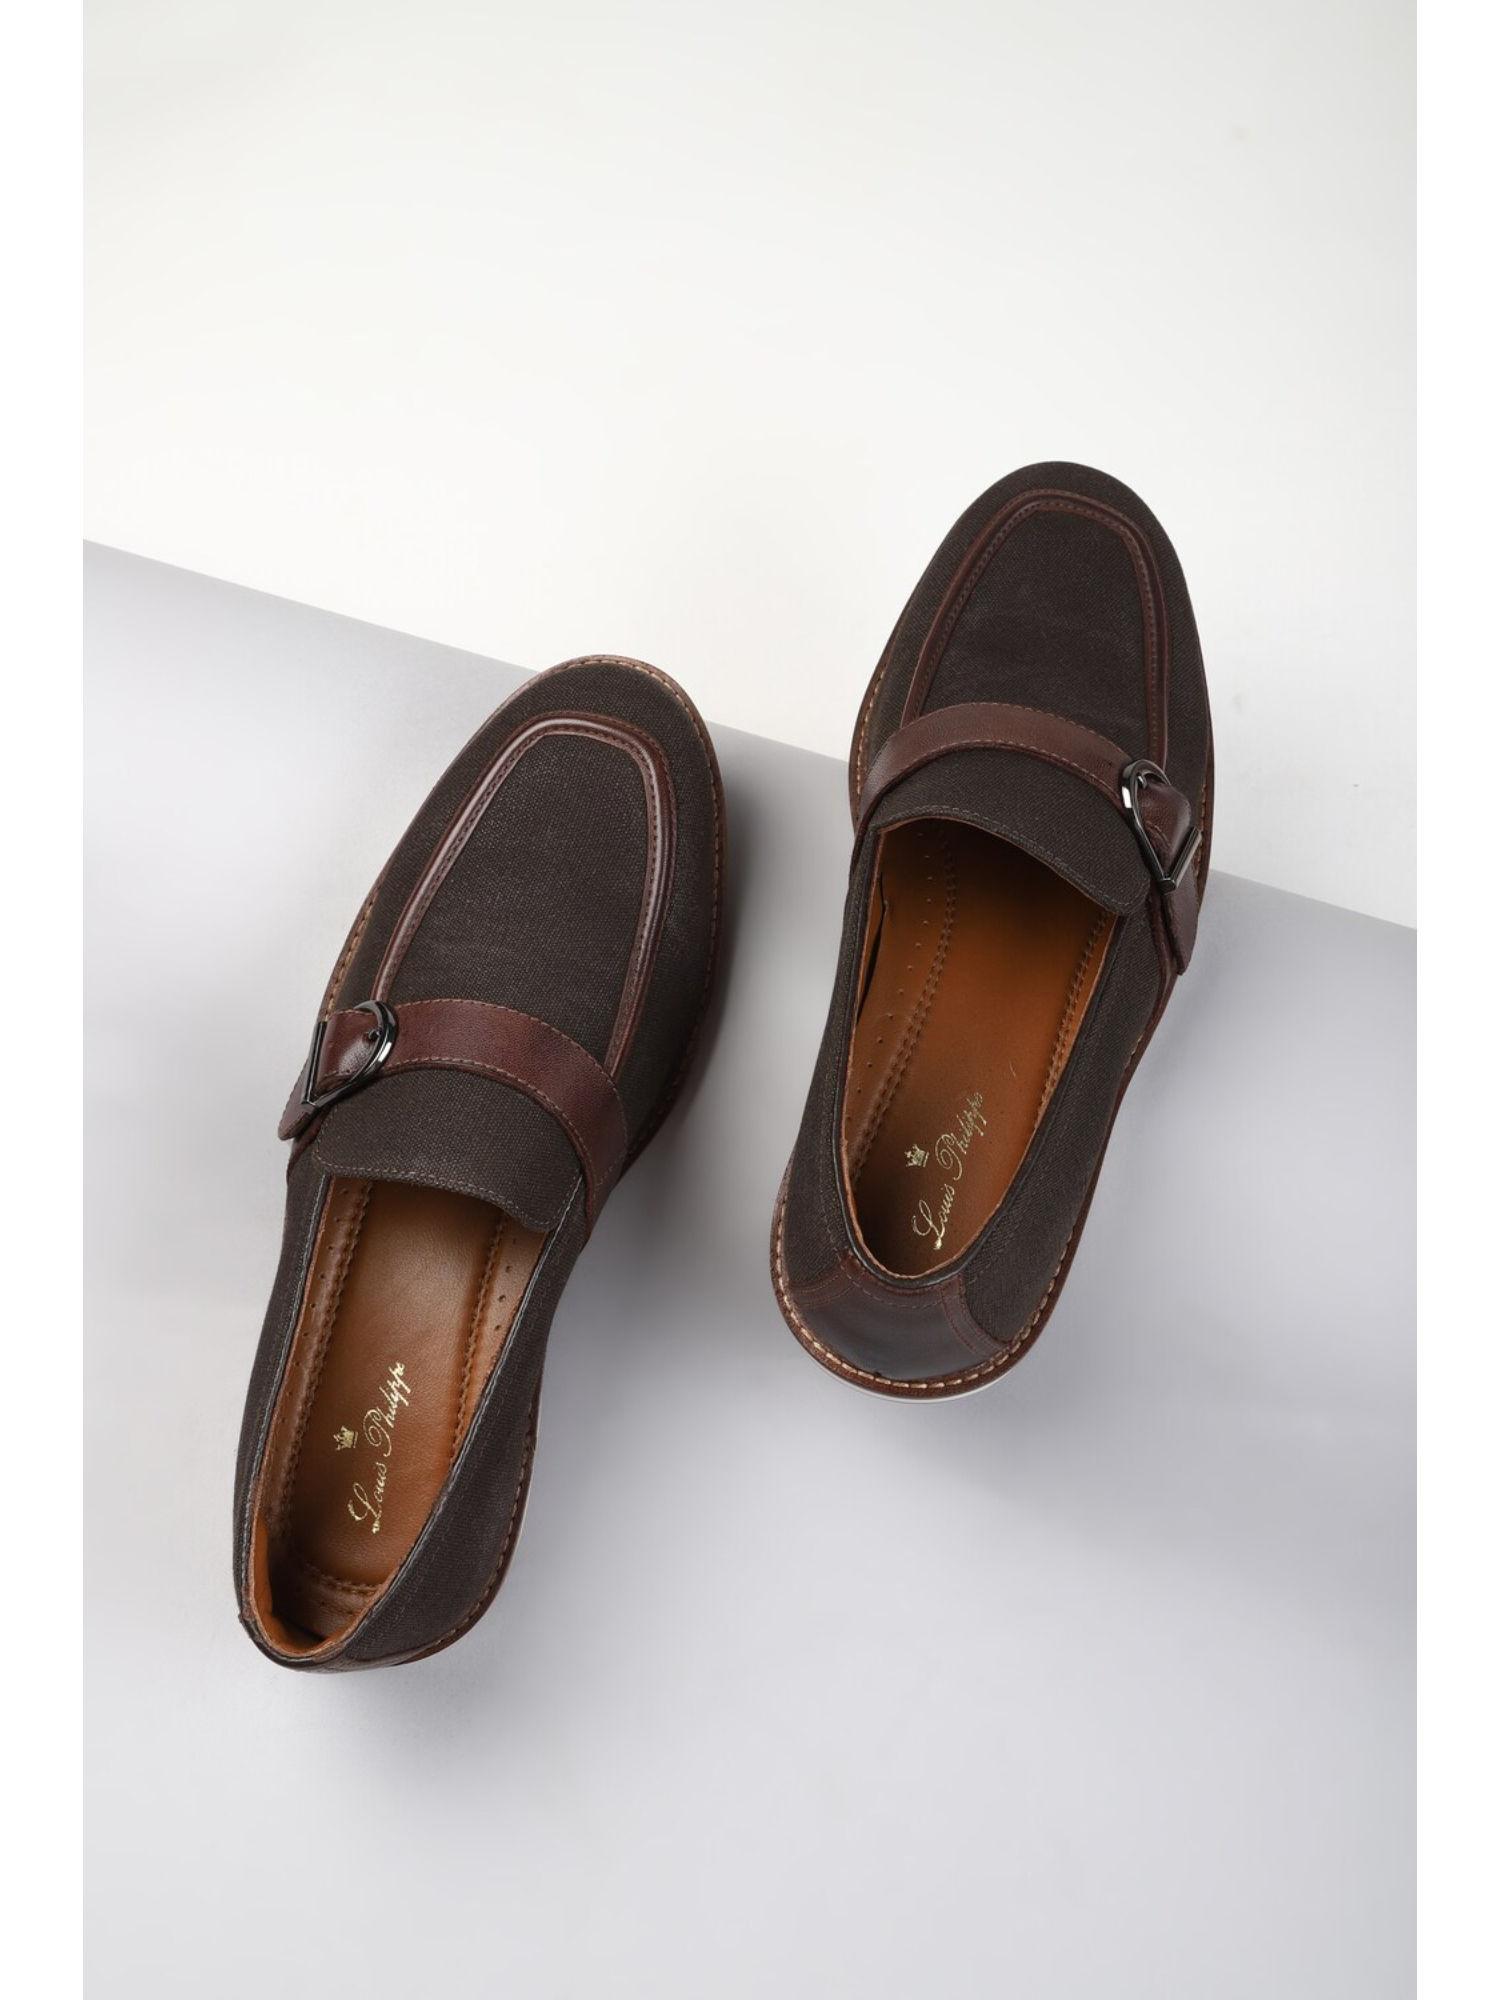 men brown leather casual buckle monk straps